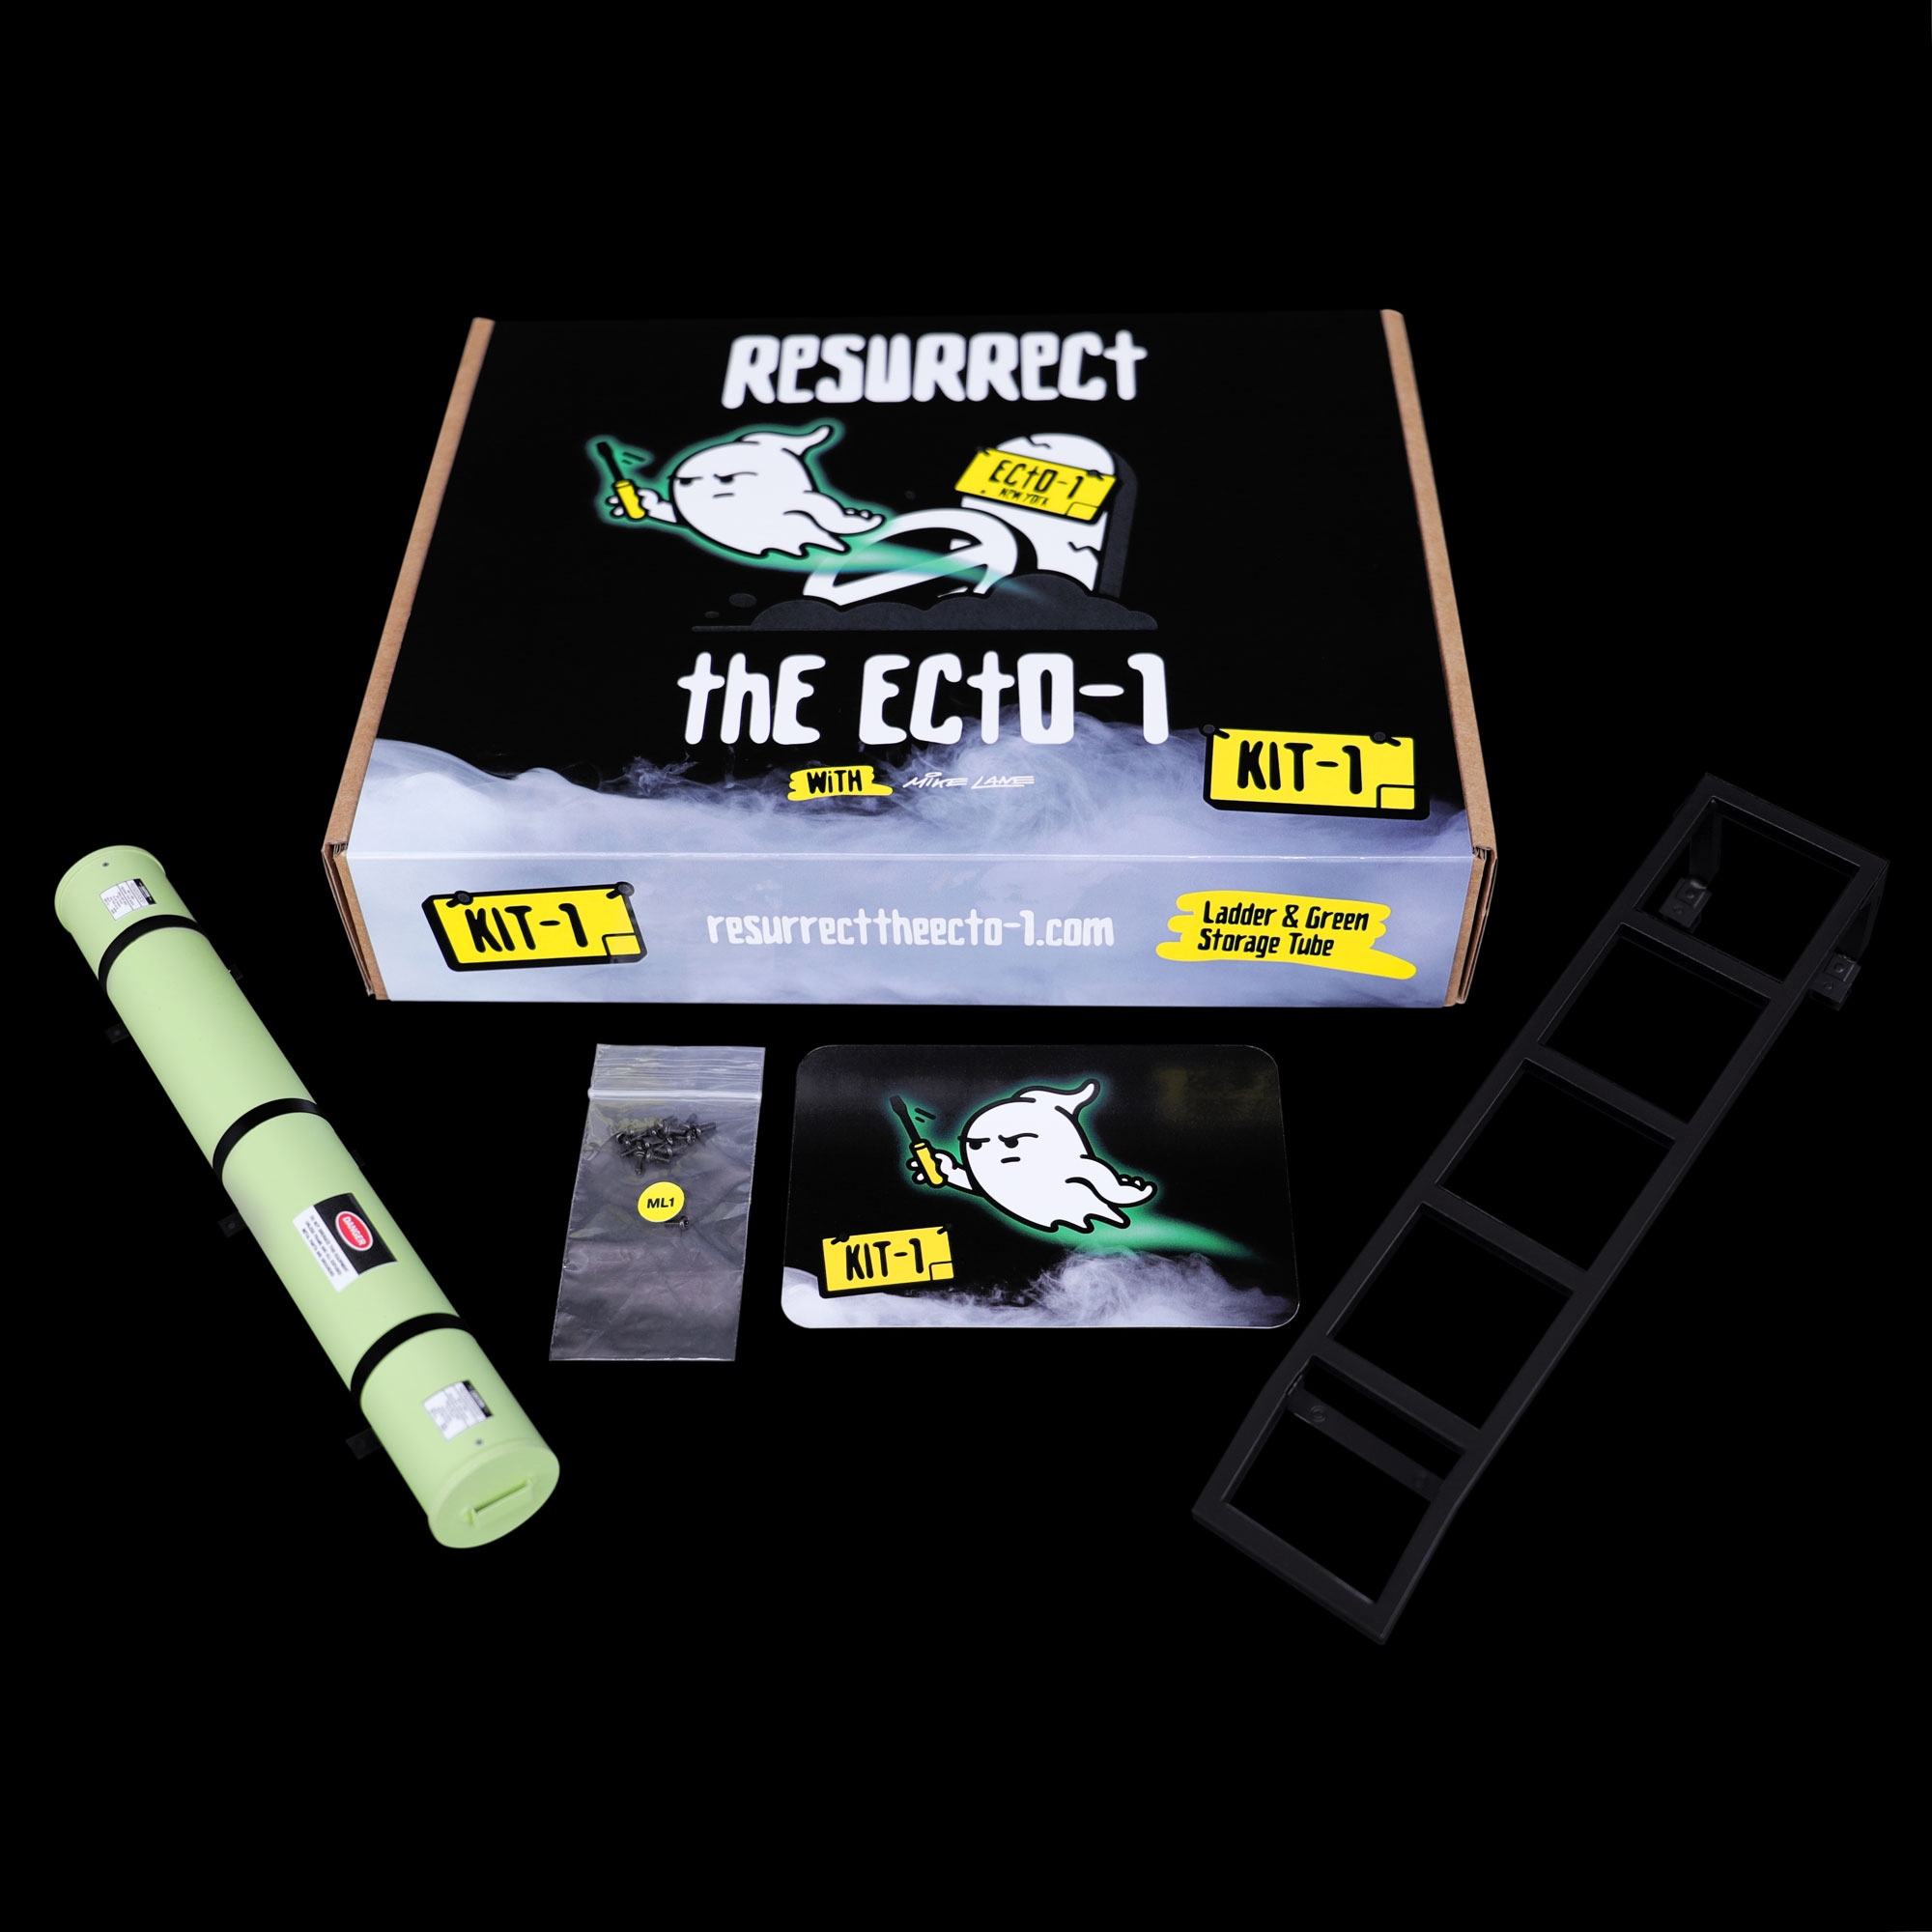 Contents of Mike Lane Resurrect the Ecto-1 Kit 1